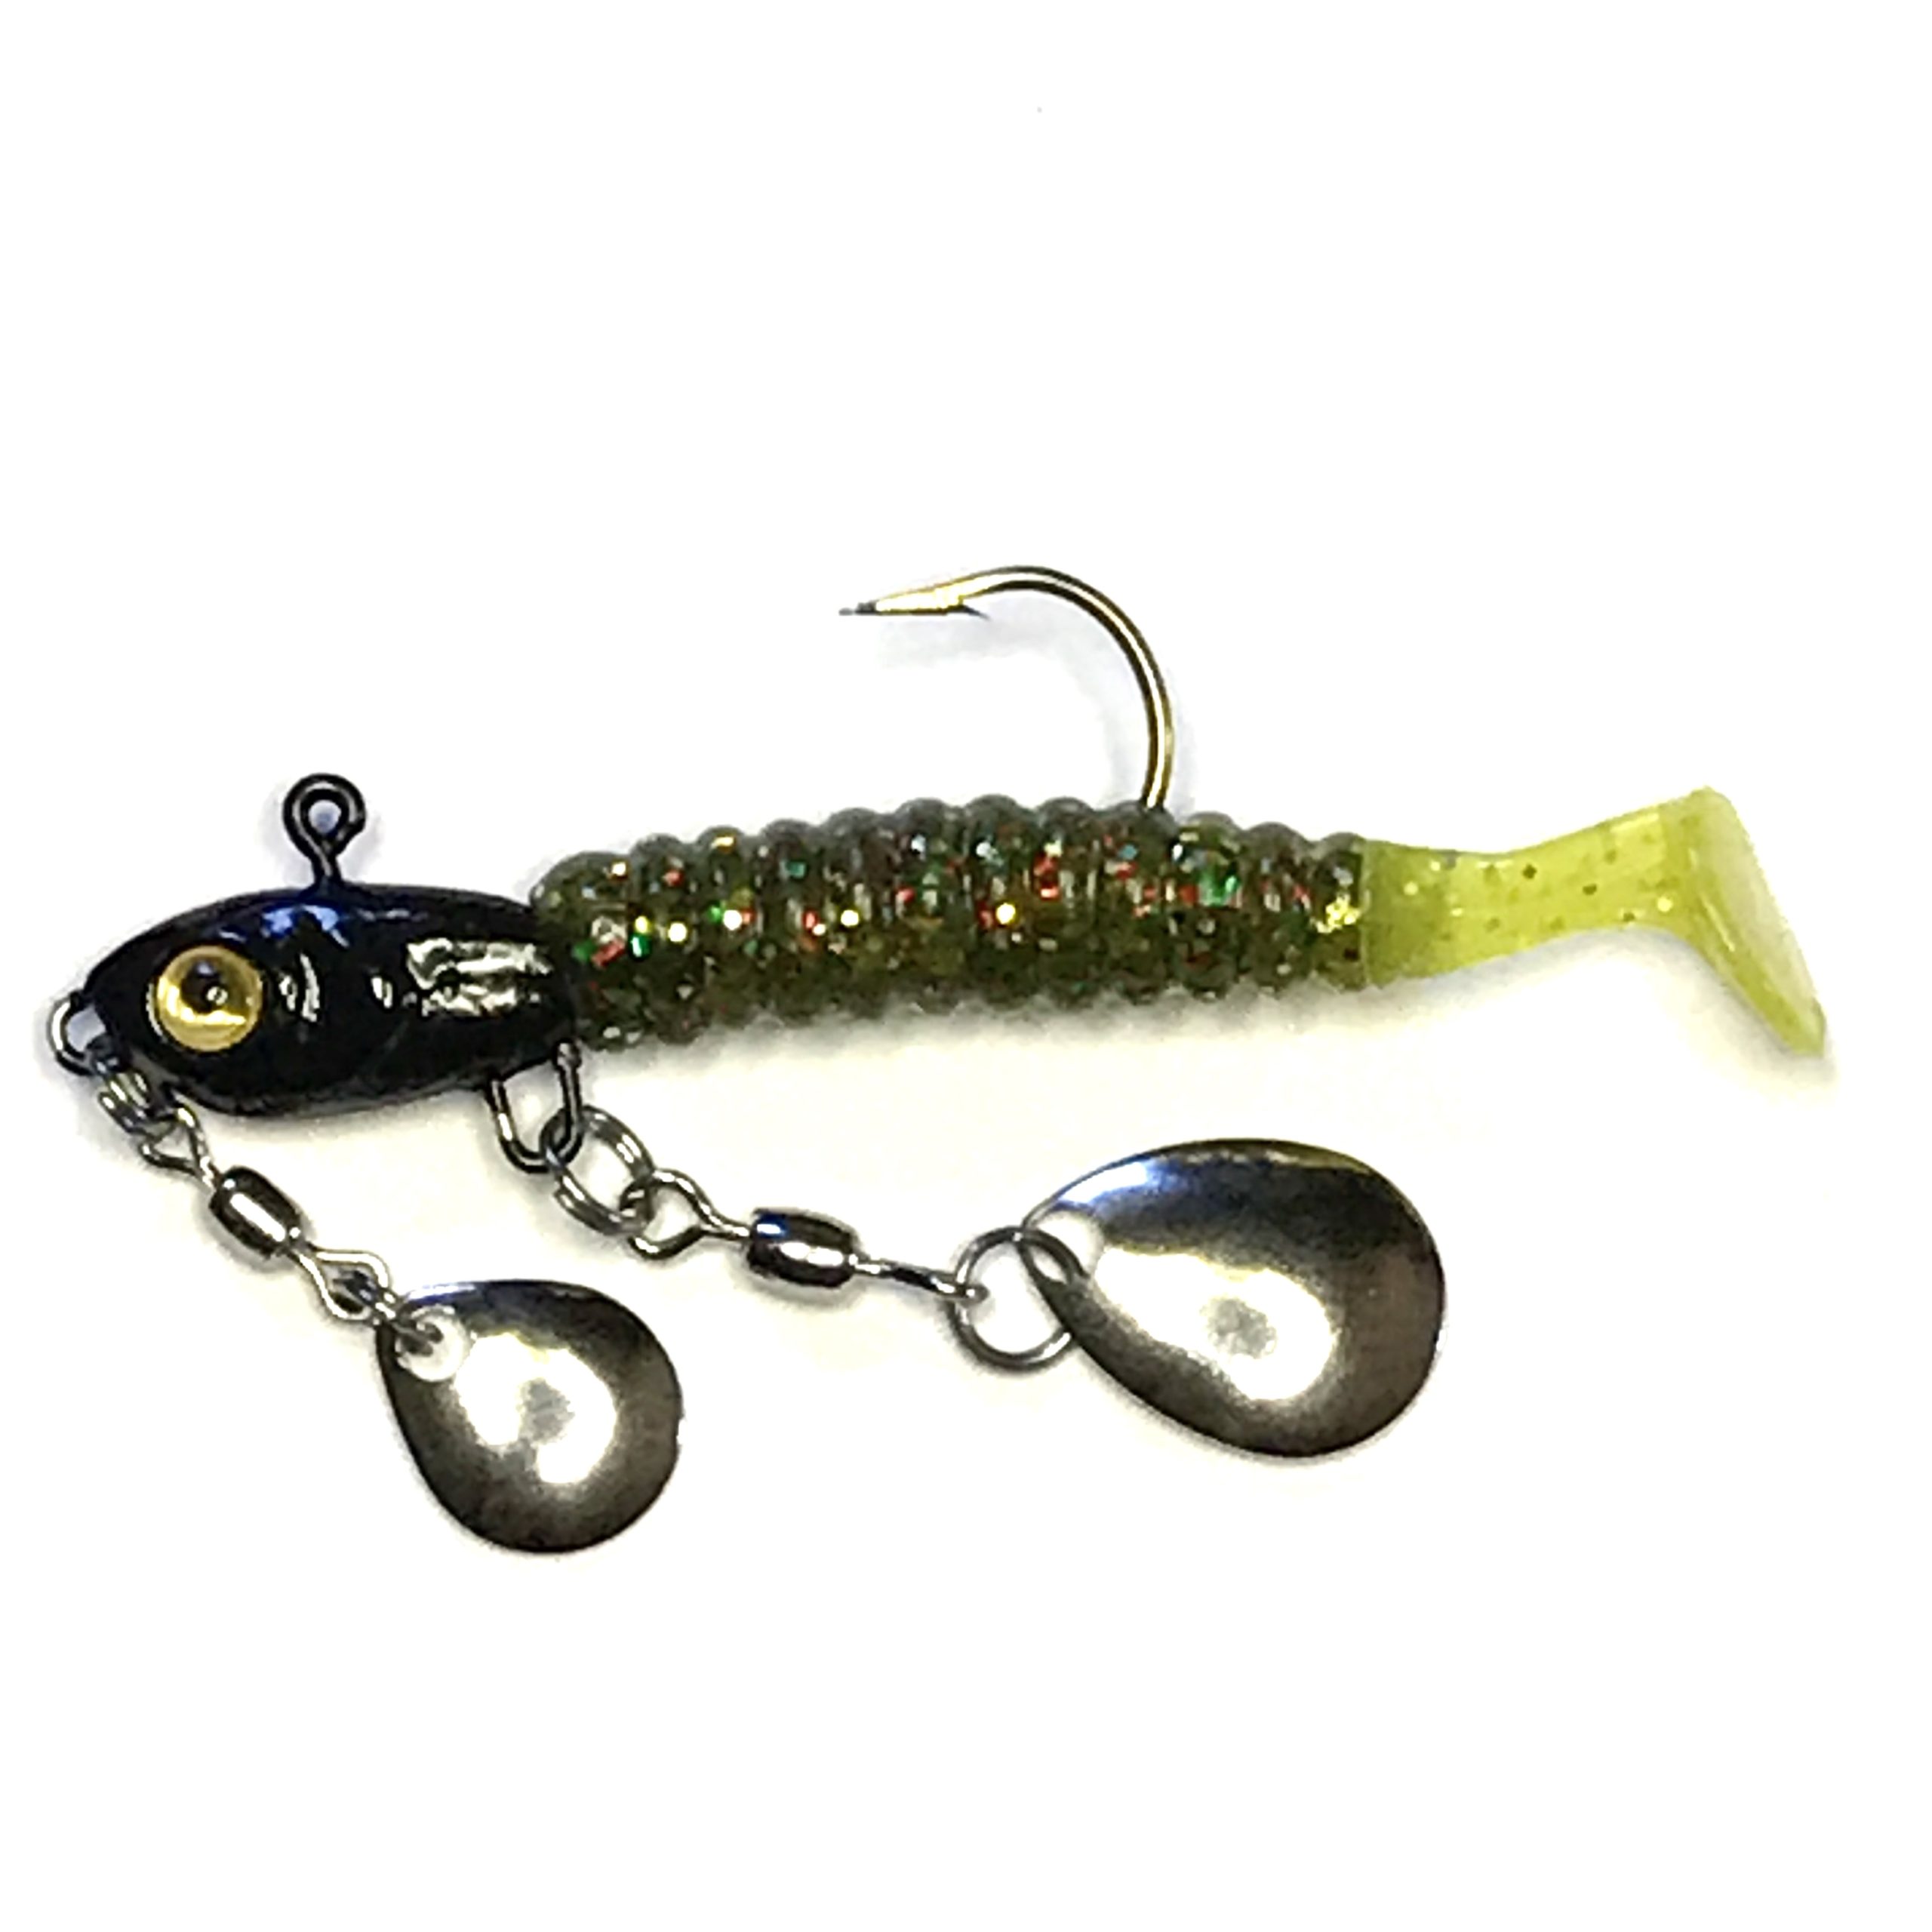 Fishing Jig Head Hooks with Spinner - Underspin Crappie Fishing